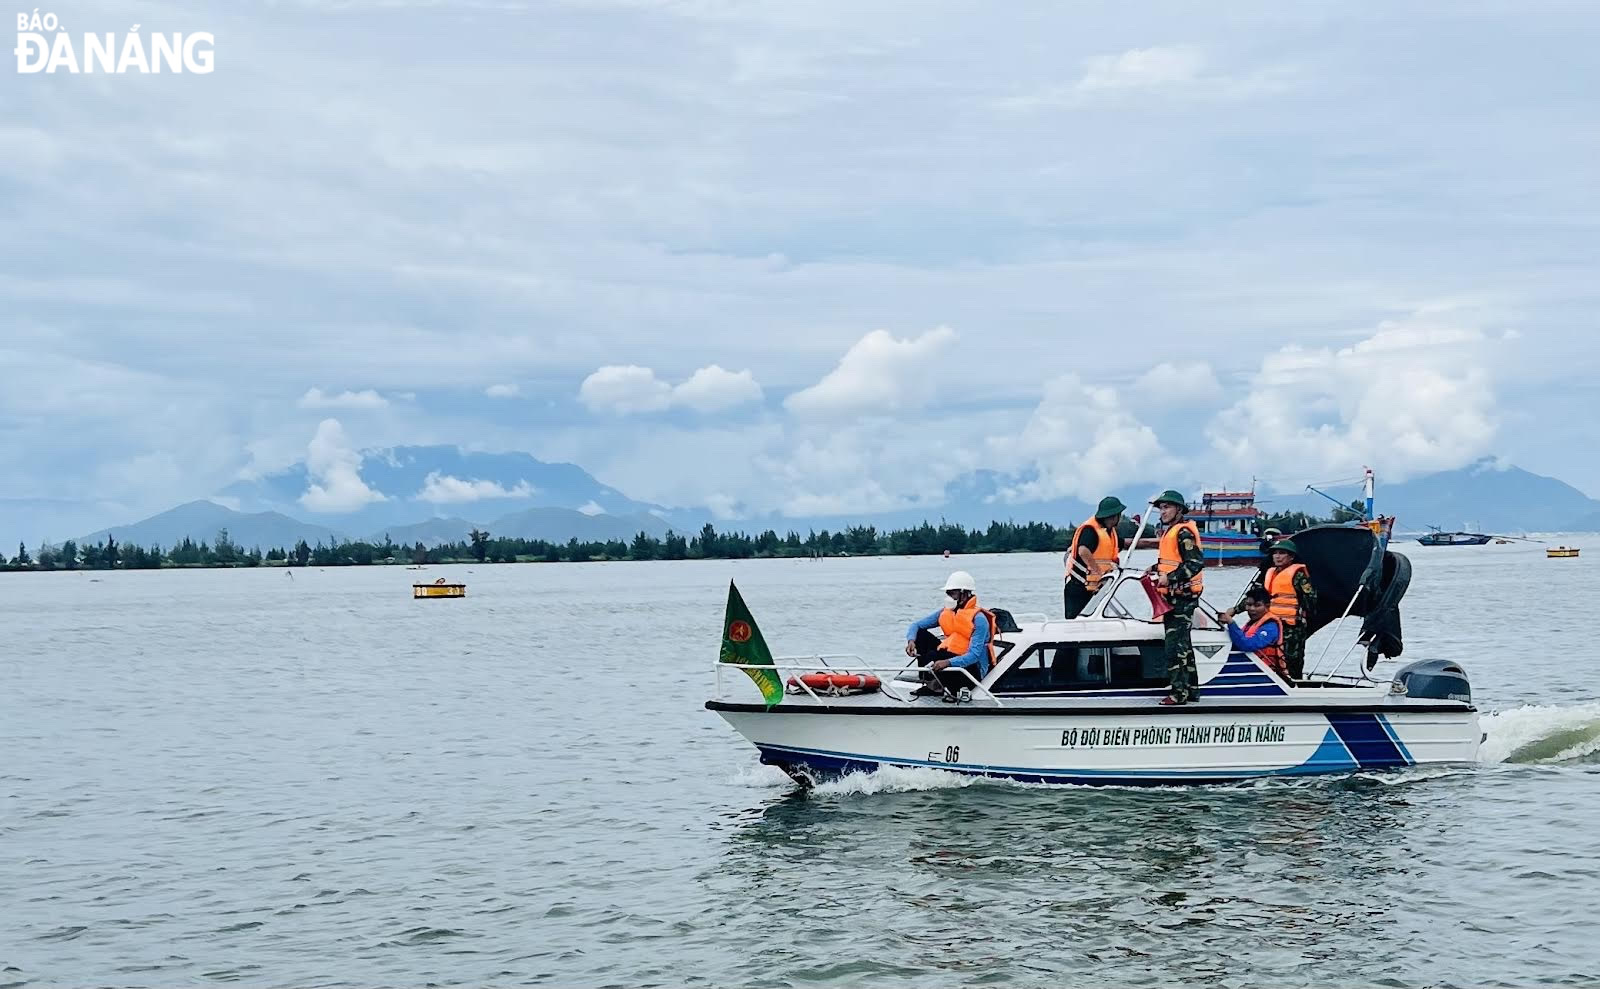 The Da Nang Border Guard force conducting their law enforcement mission to ensure security and order on the city’s maritime border.